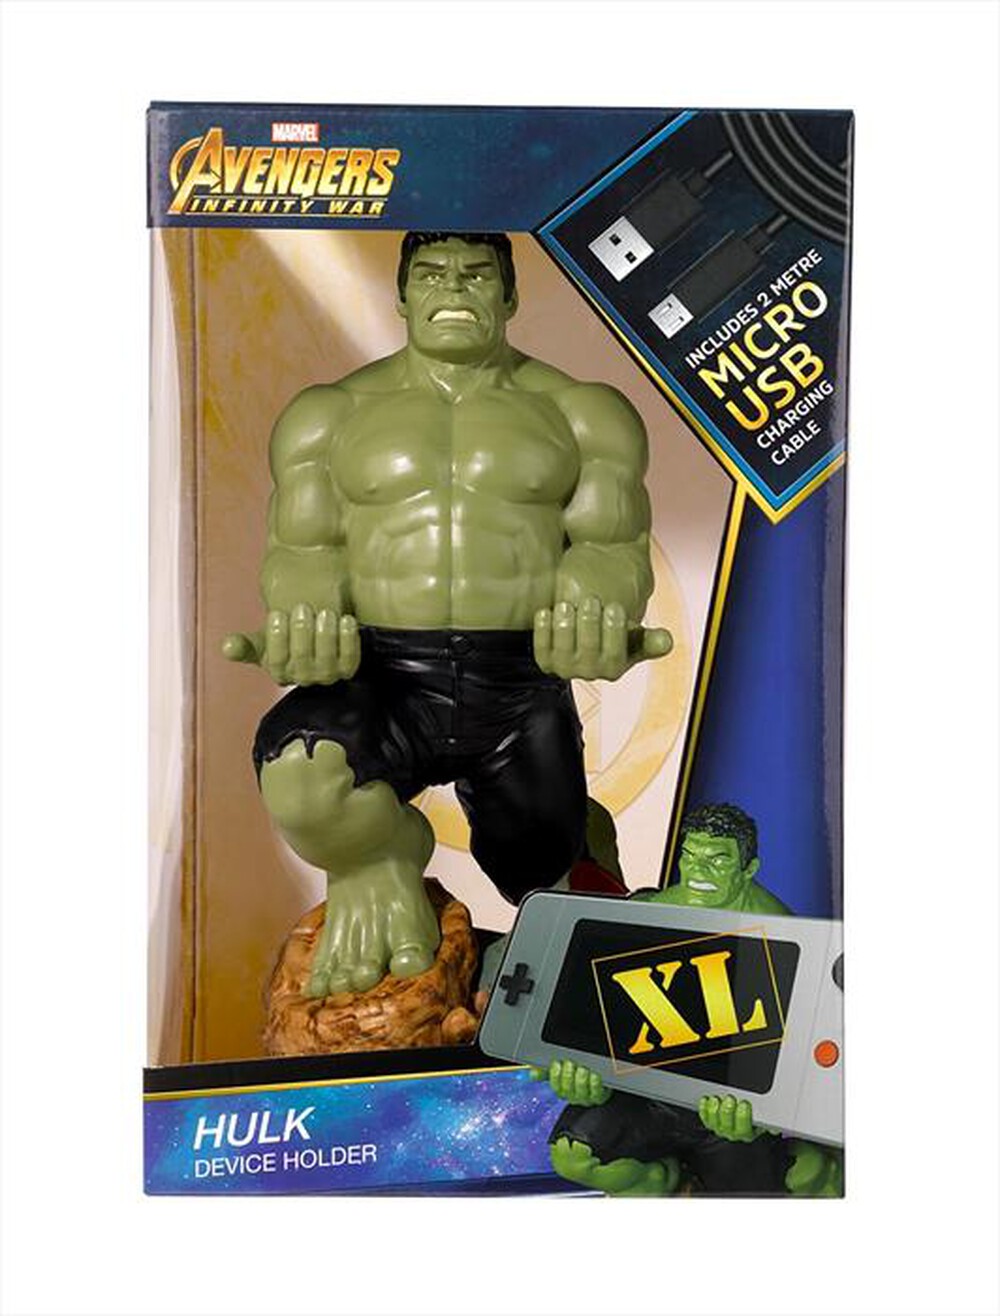 "EXQUISITE GAMING - XL HULK CABLE GUY"